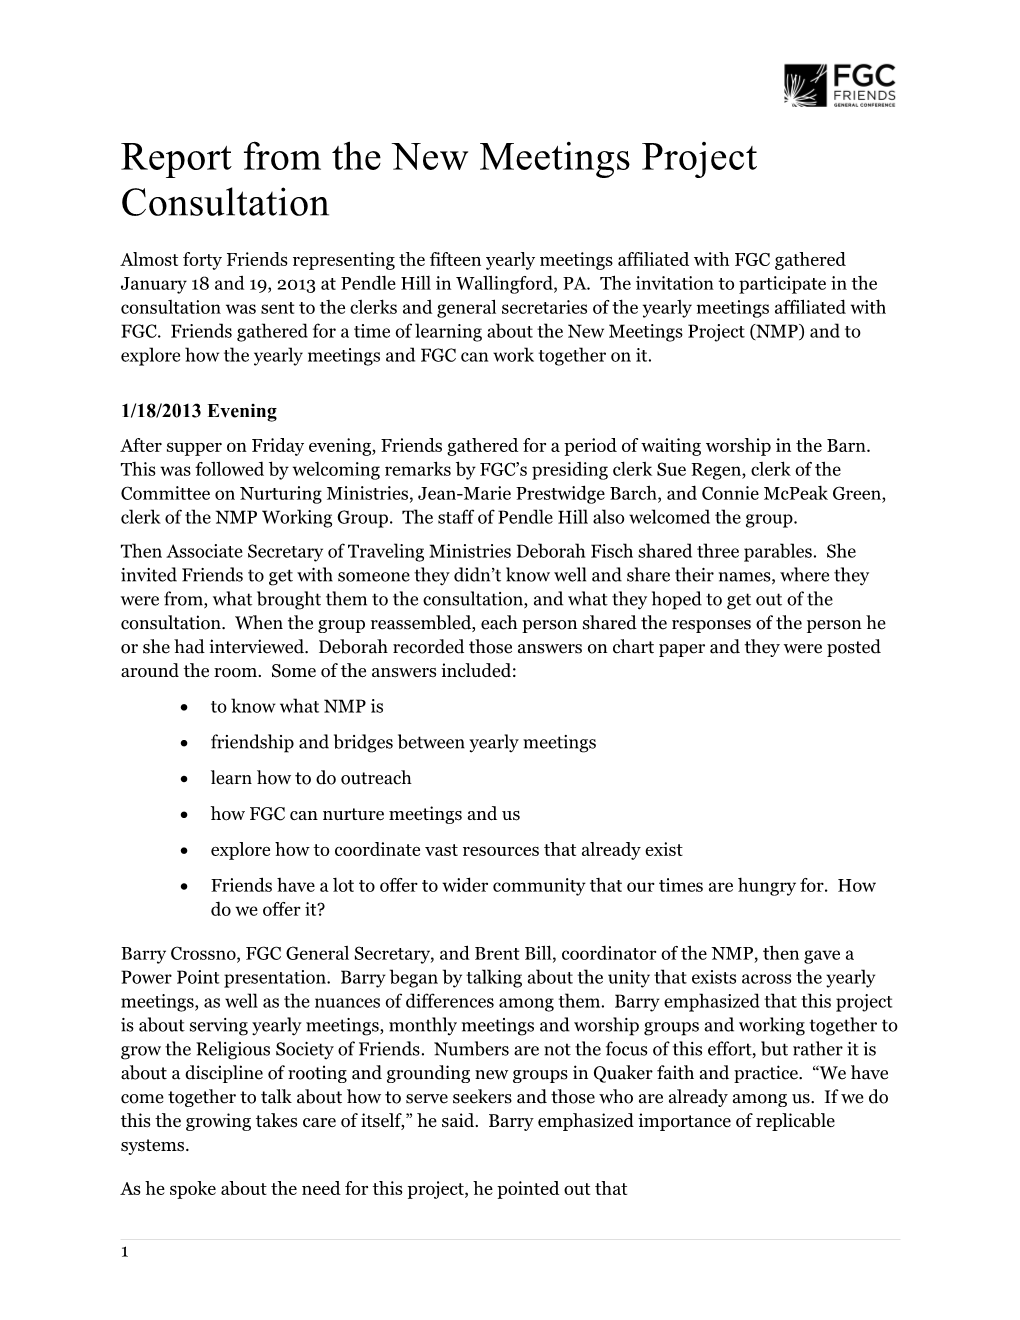 Report from the New Meetings Project Consultation